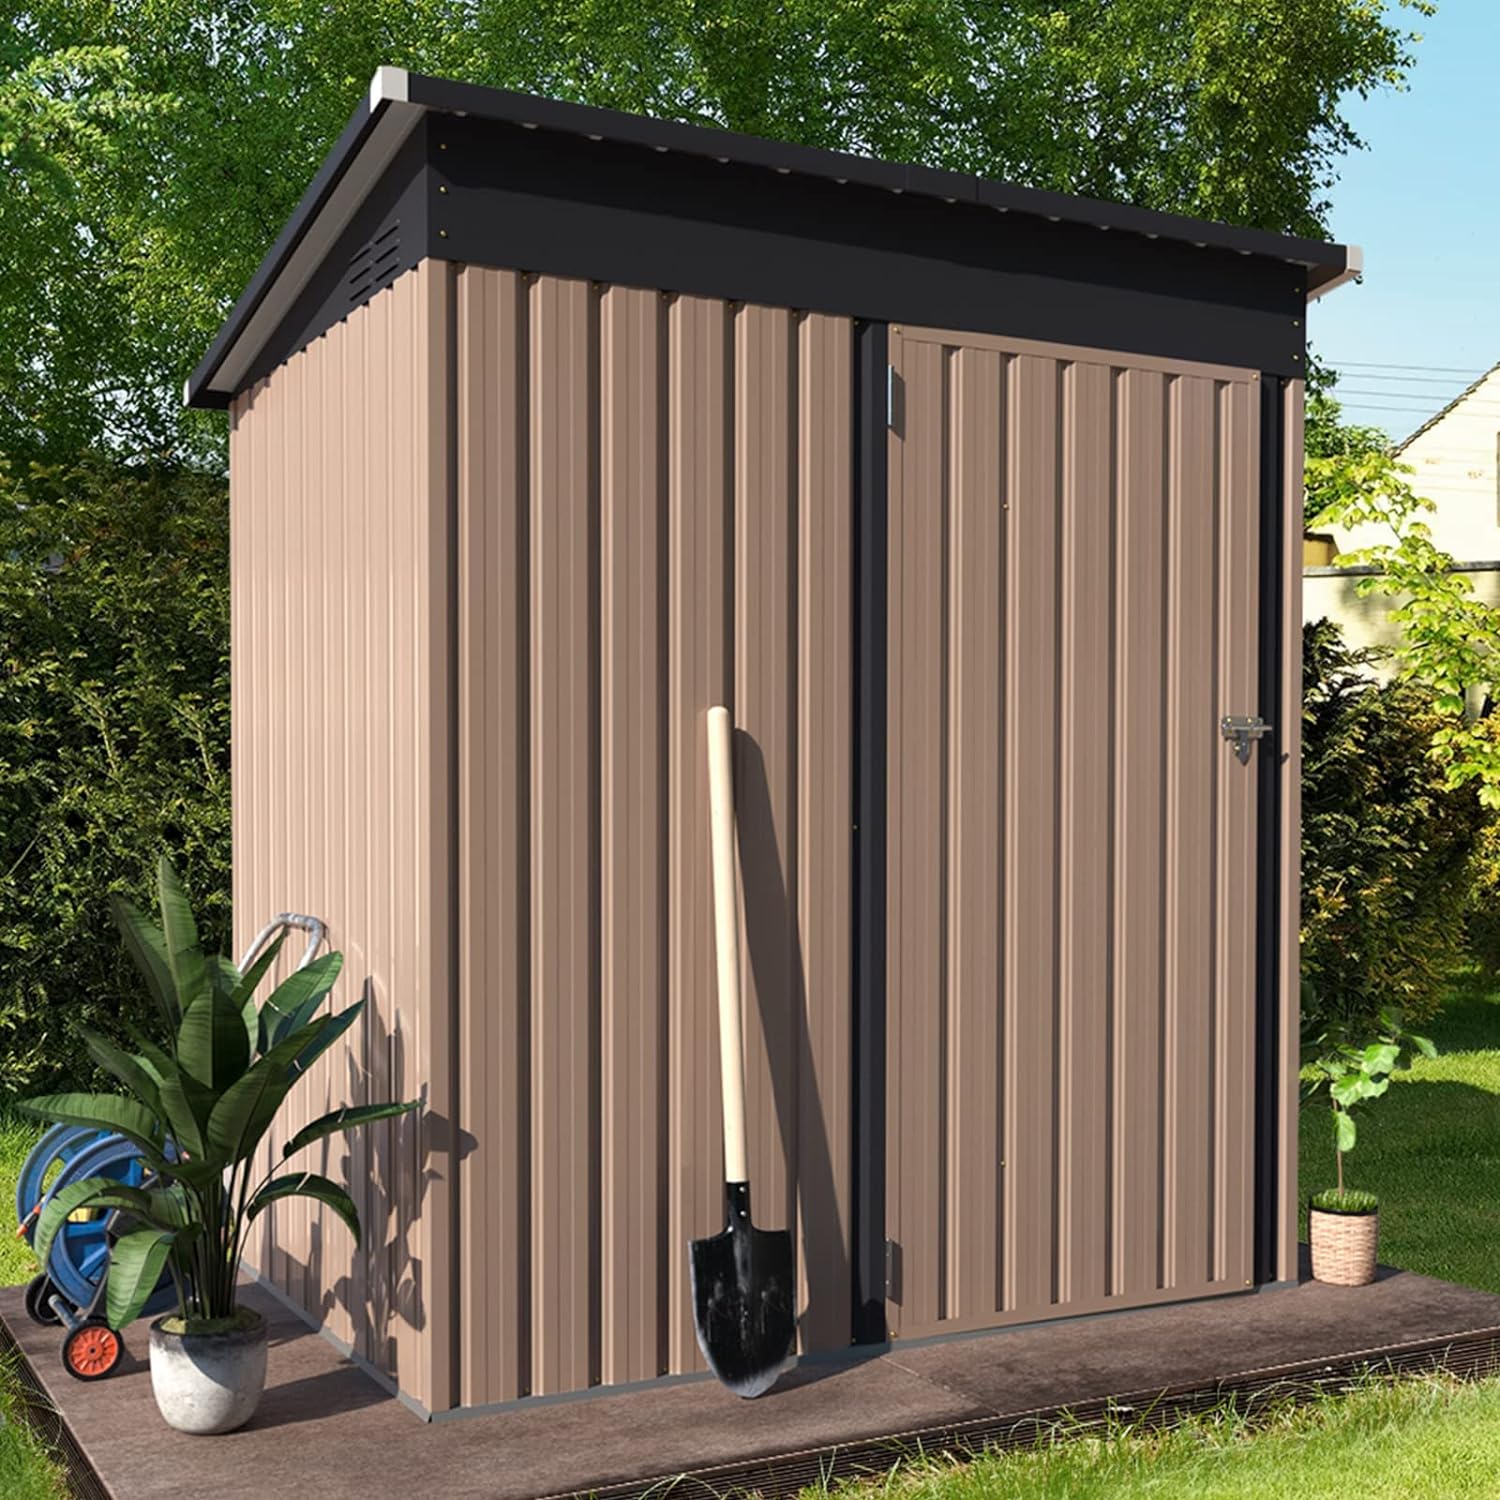 AECOJOY 5' x 3' Outdoor Storage Shed, Small Metal Shed (16.6 Sq.Ft Land) with Design of Lockable Door, Utility and Tool Storage for Garden, Backyard, Patio, Outside use.